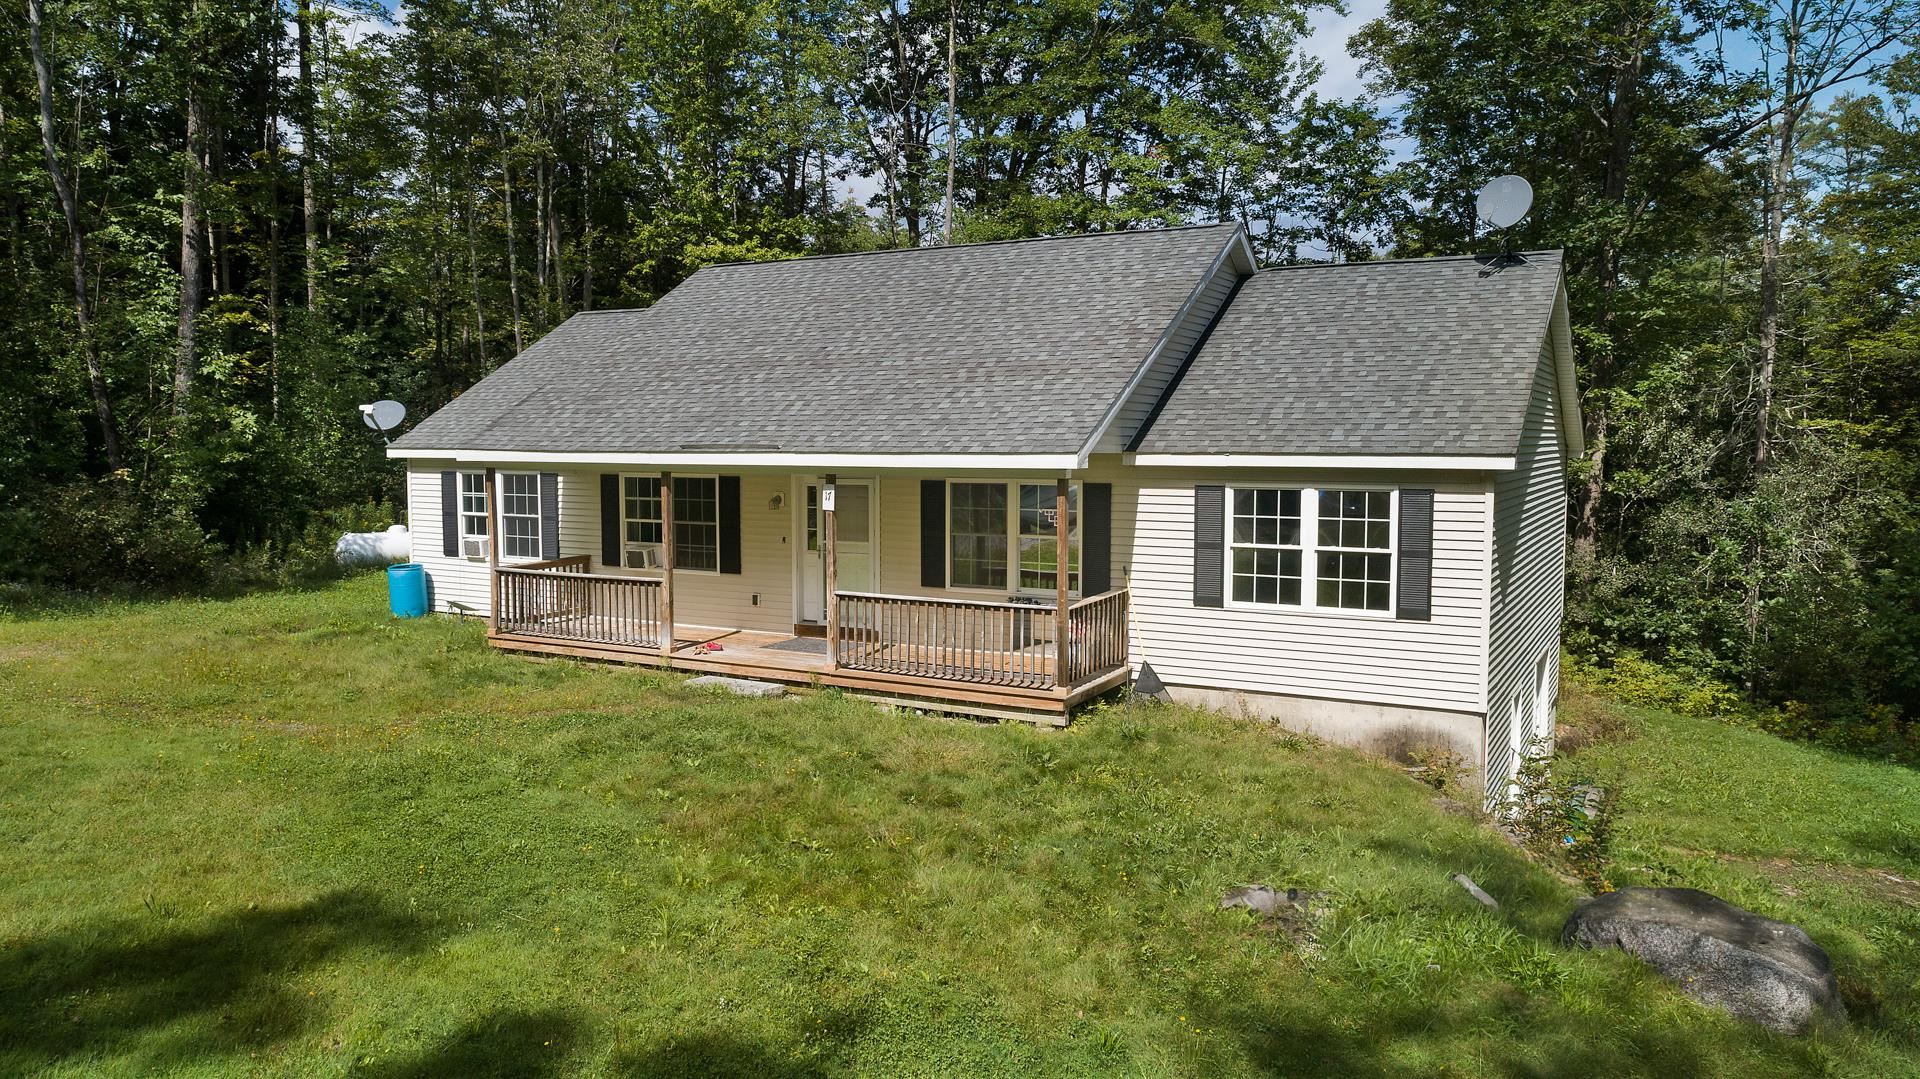 Homes for Sale in Croydon NH